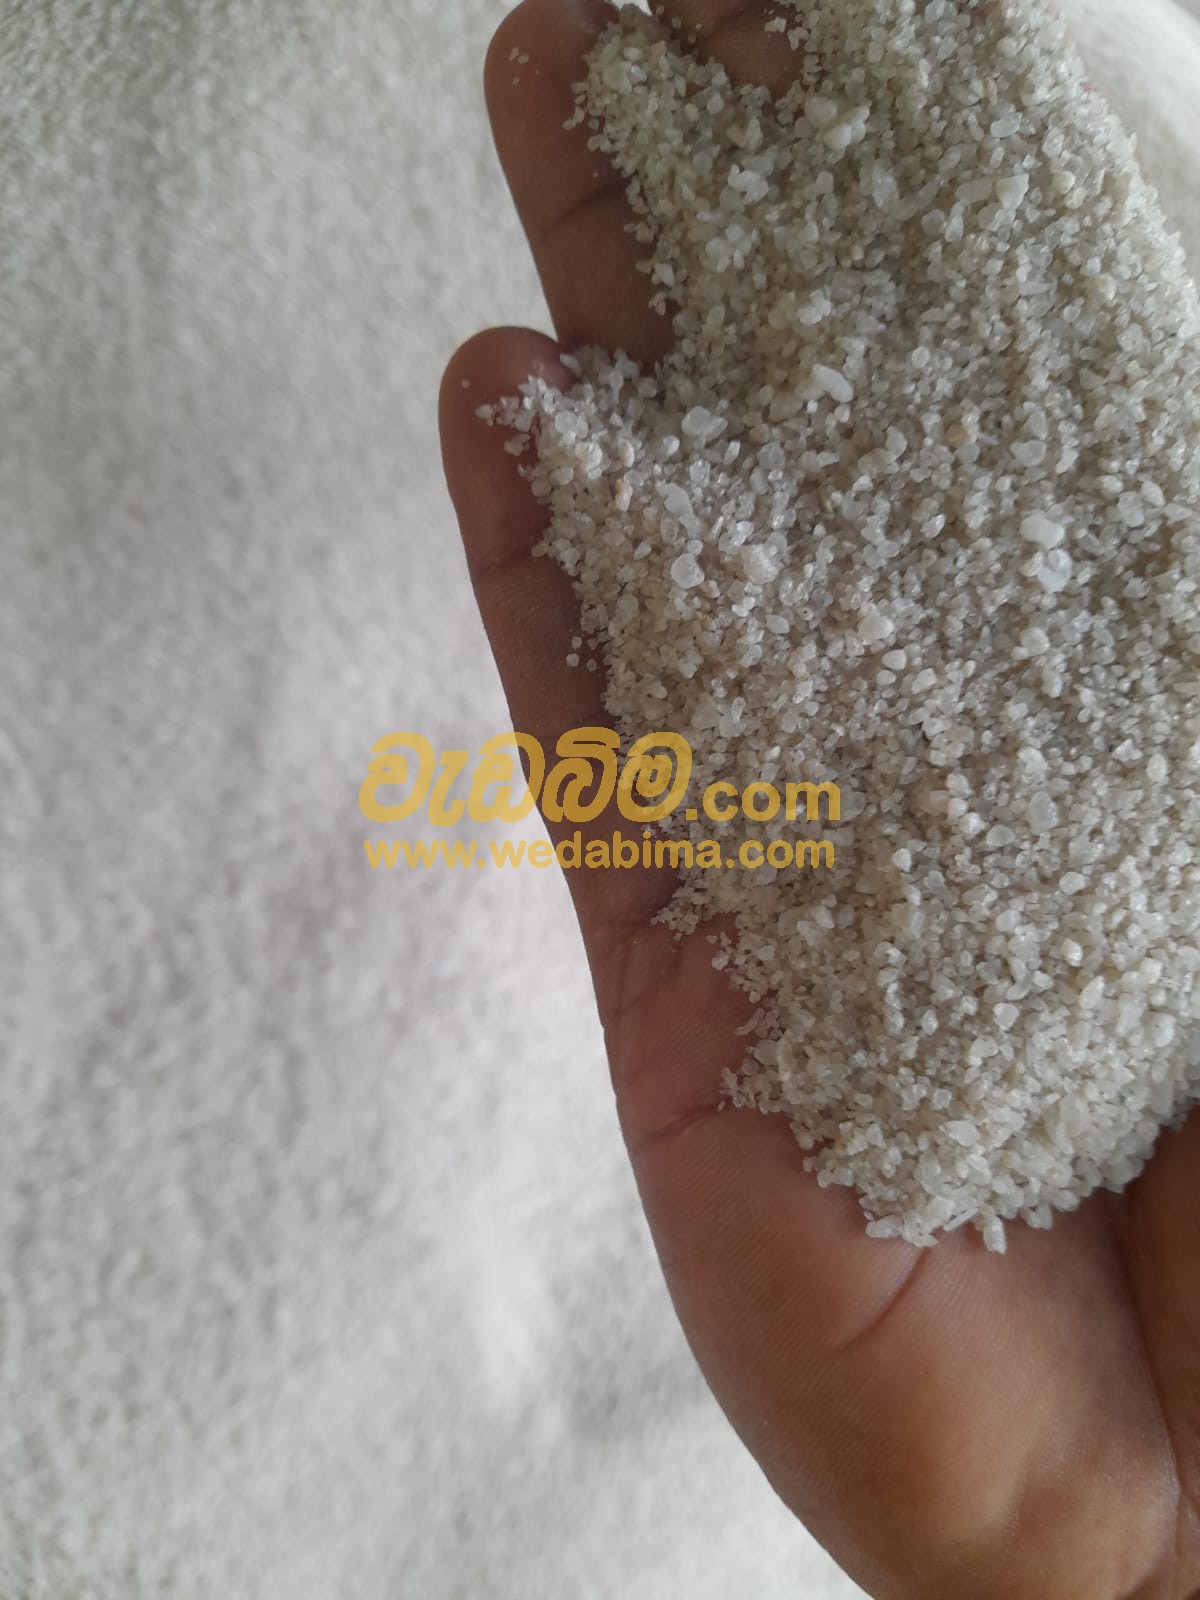 Silica Sand for Pool Filters in Sri Lanka